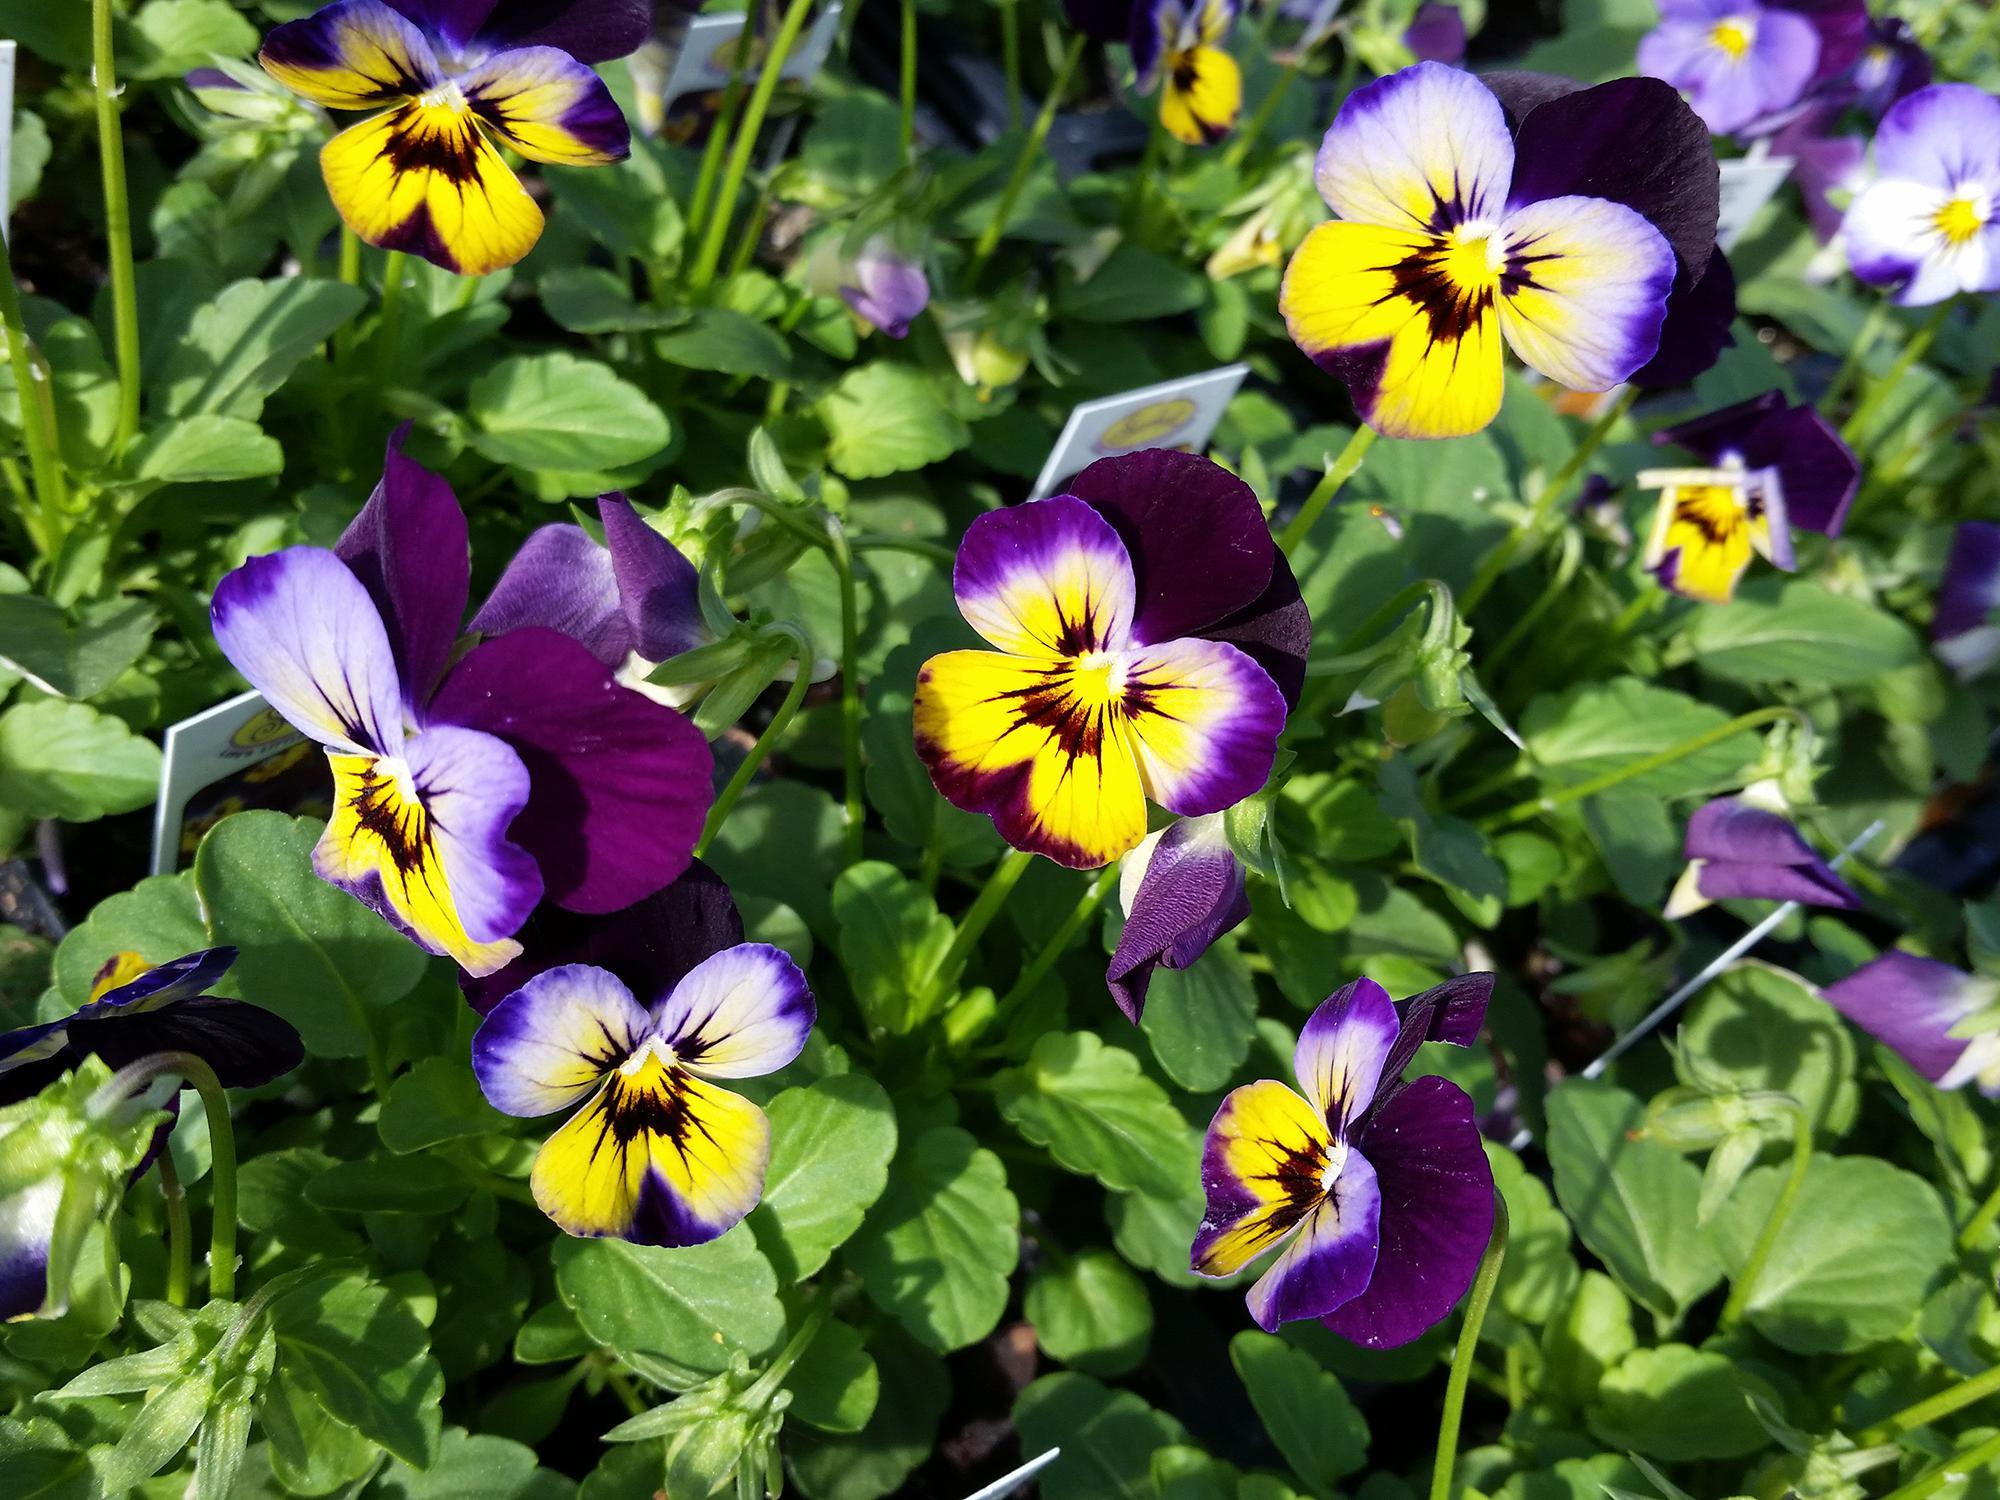 The Sorbet series of violas, such as this Midnight Glow selection, resist stretching and stay compact through winter and even as temperatures rise in the spring. (Photo by MSU Extension/Gary Bachman)